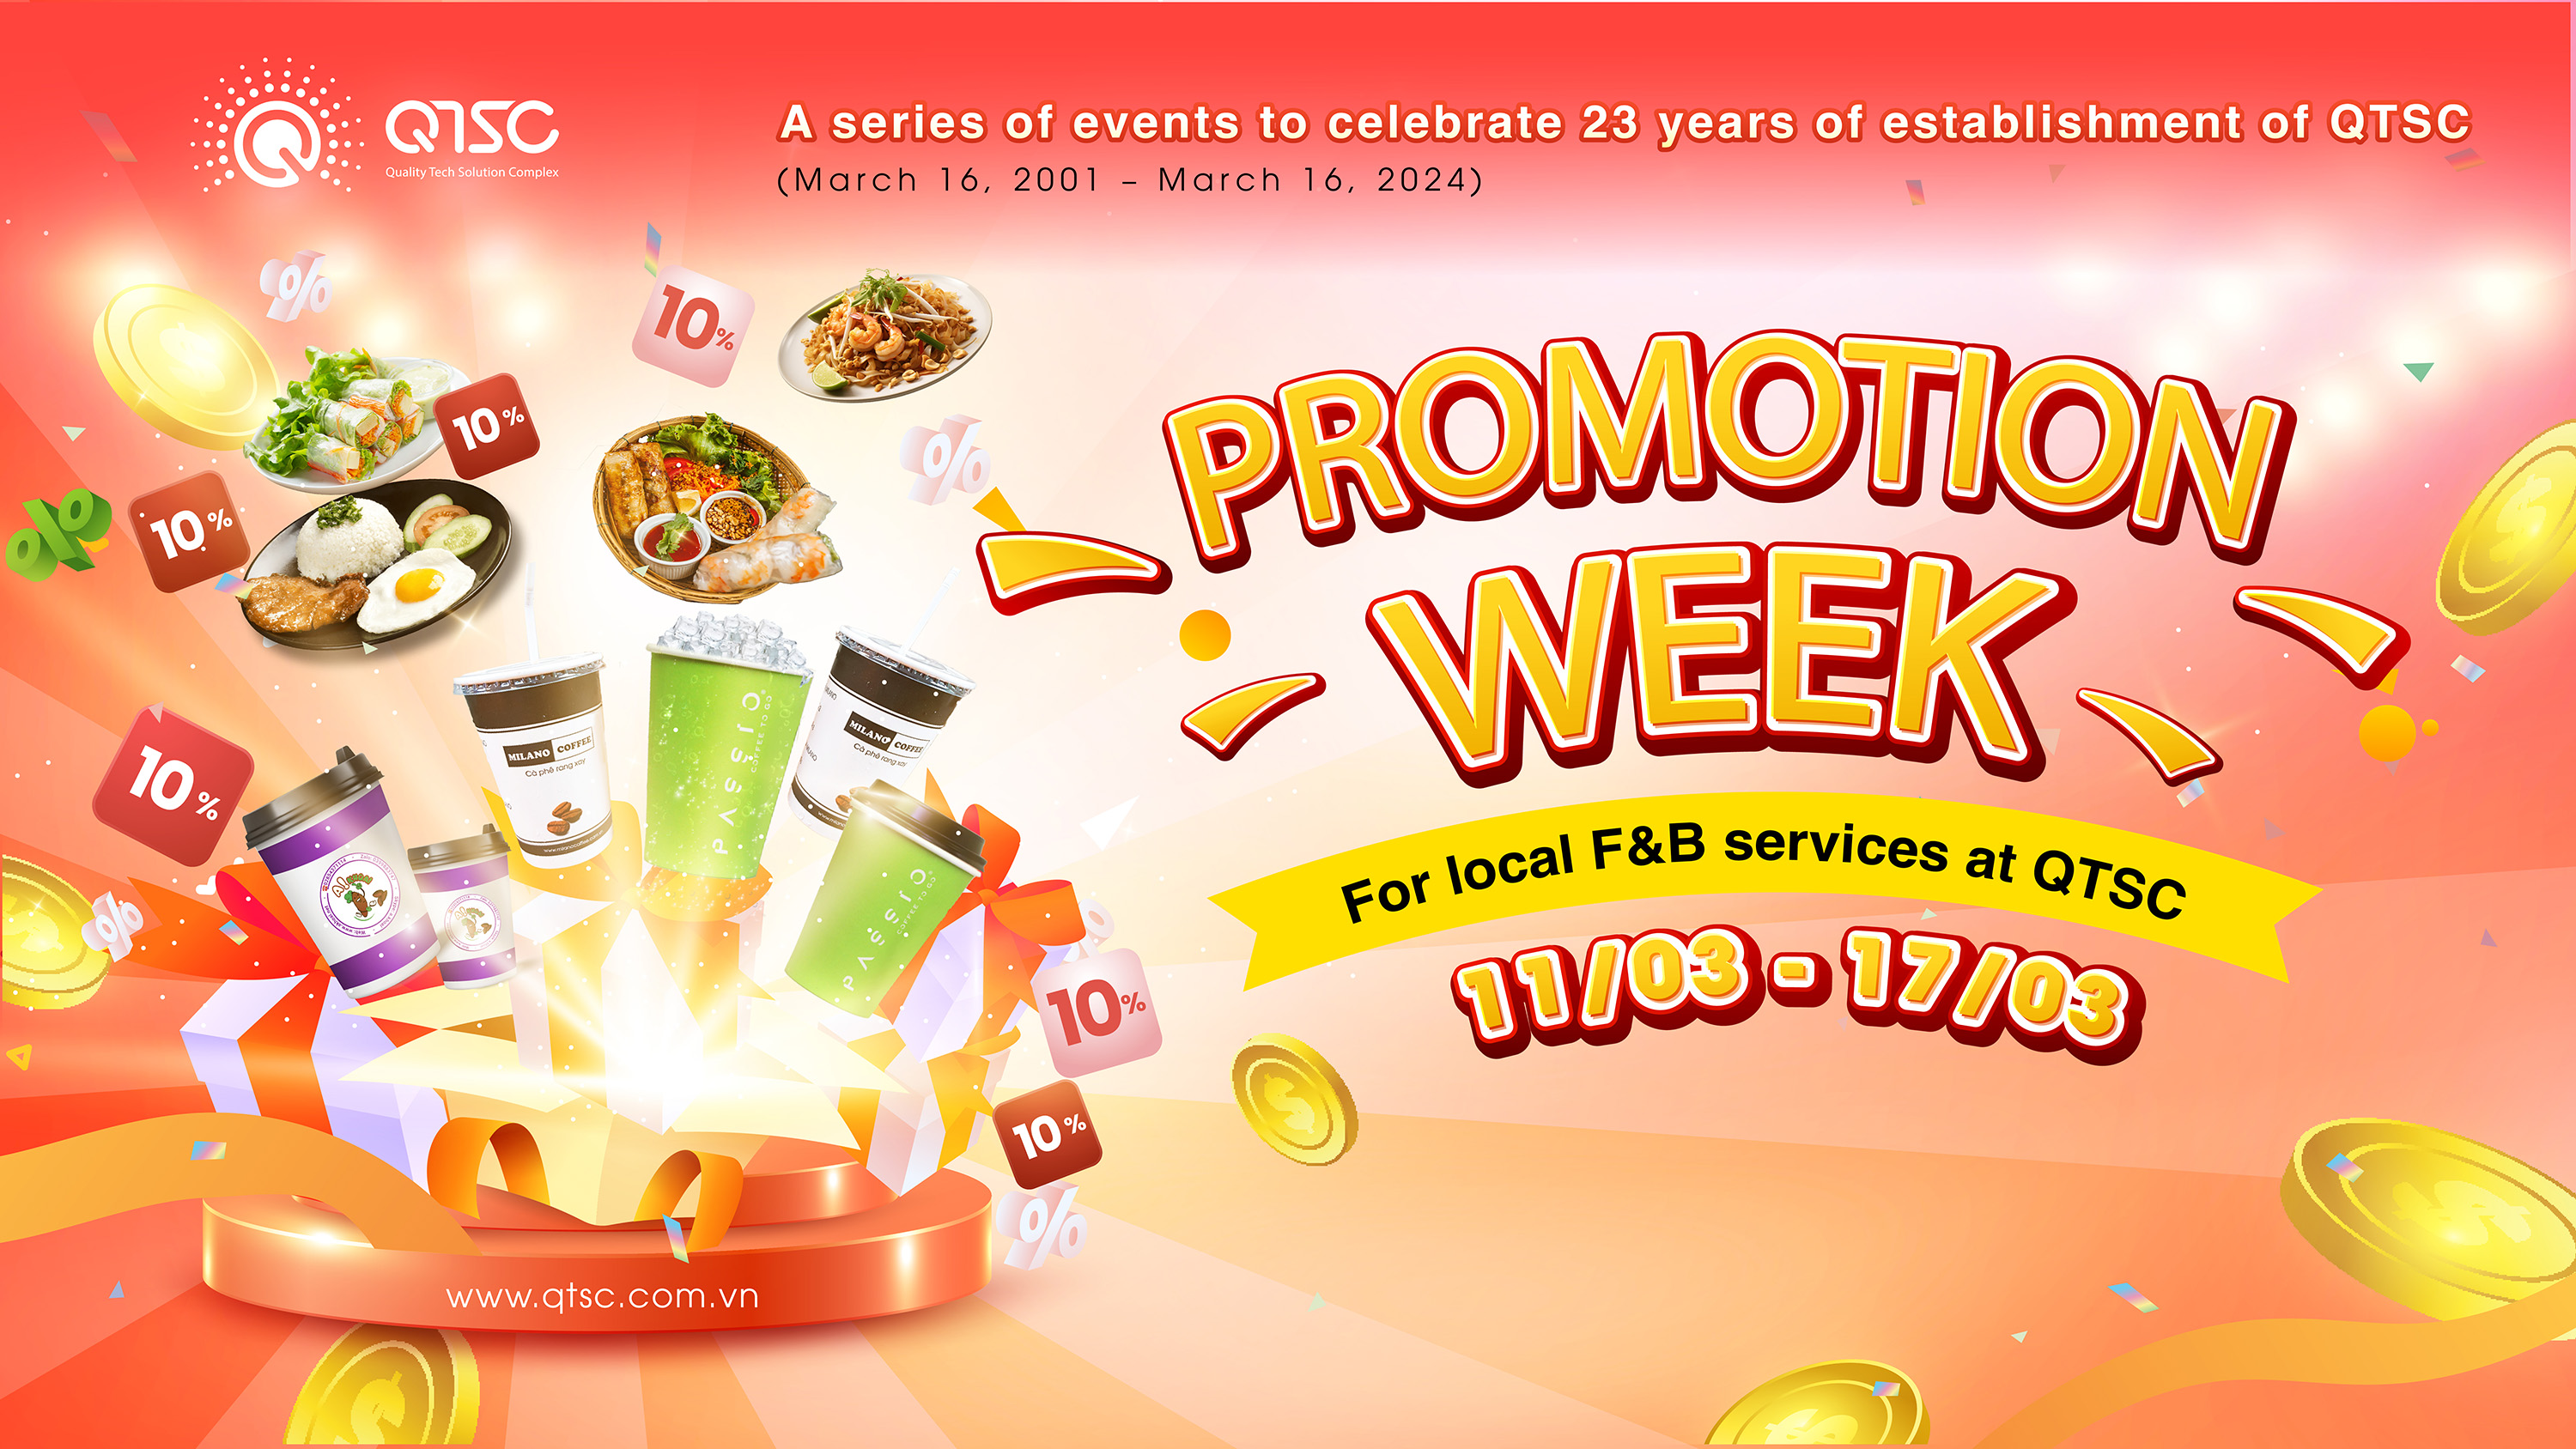 Promotion week for local F&B services at QTSC (March 11-17, 2024)